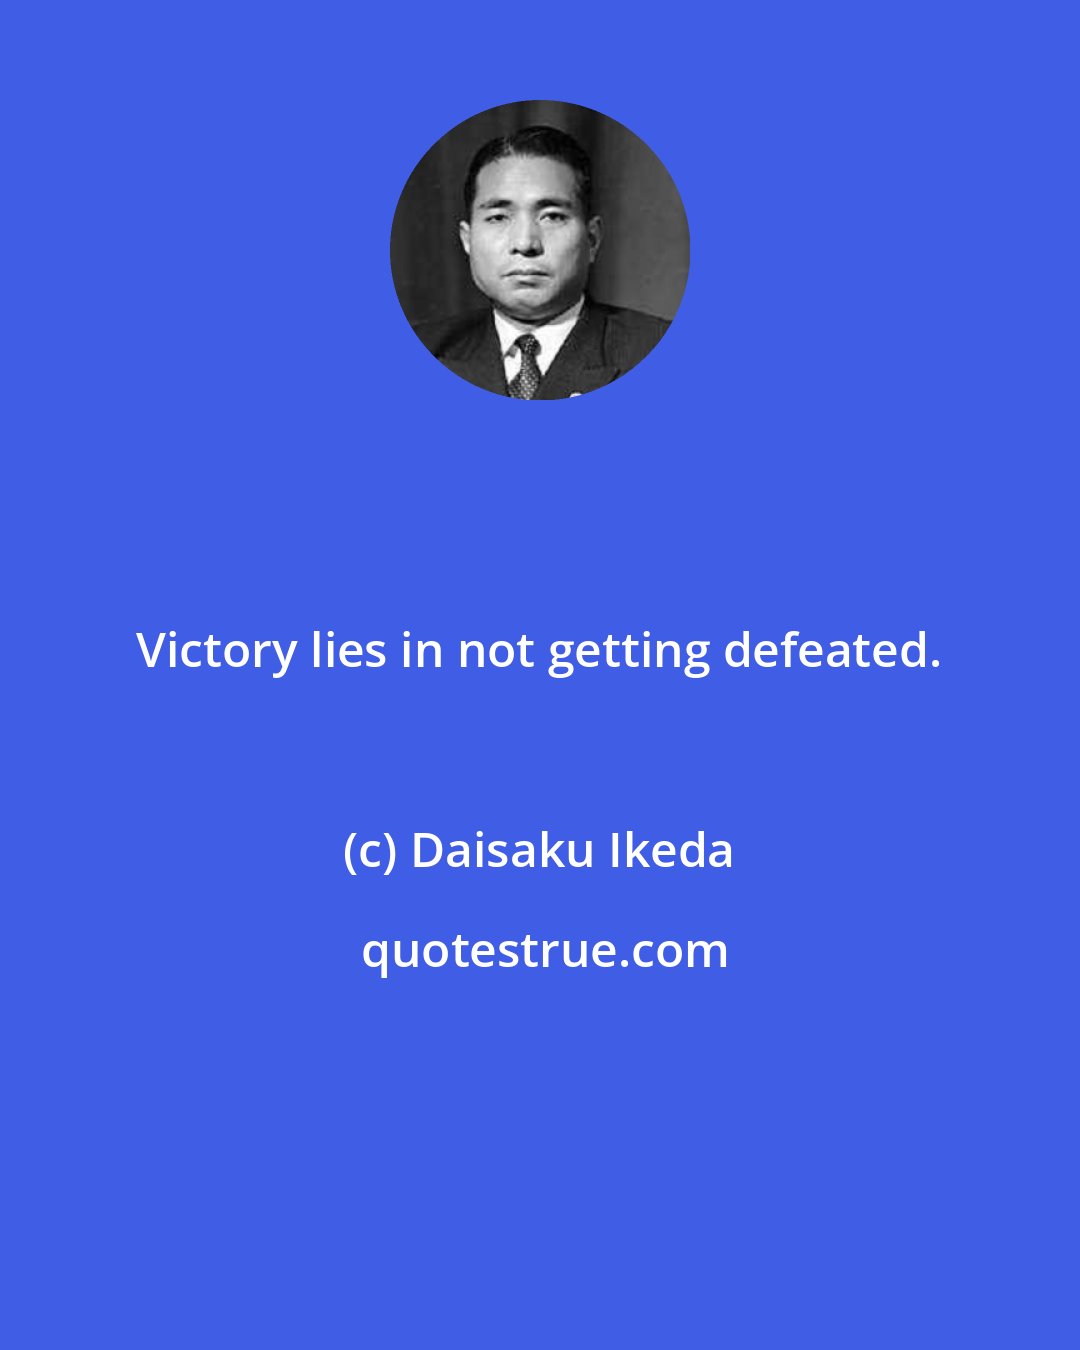 Daisaku Ikeda: Victory lies in not getting defeated.